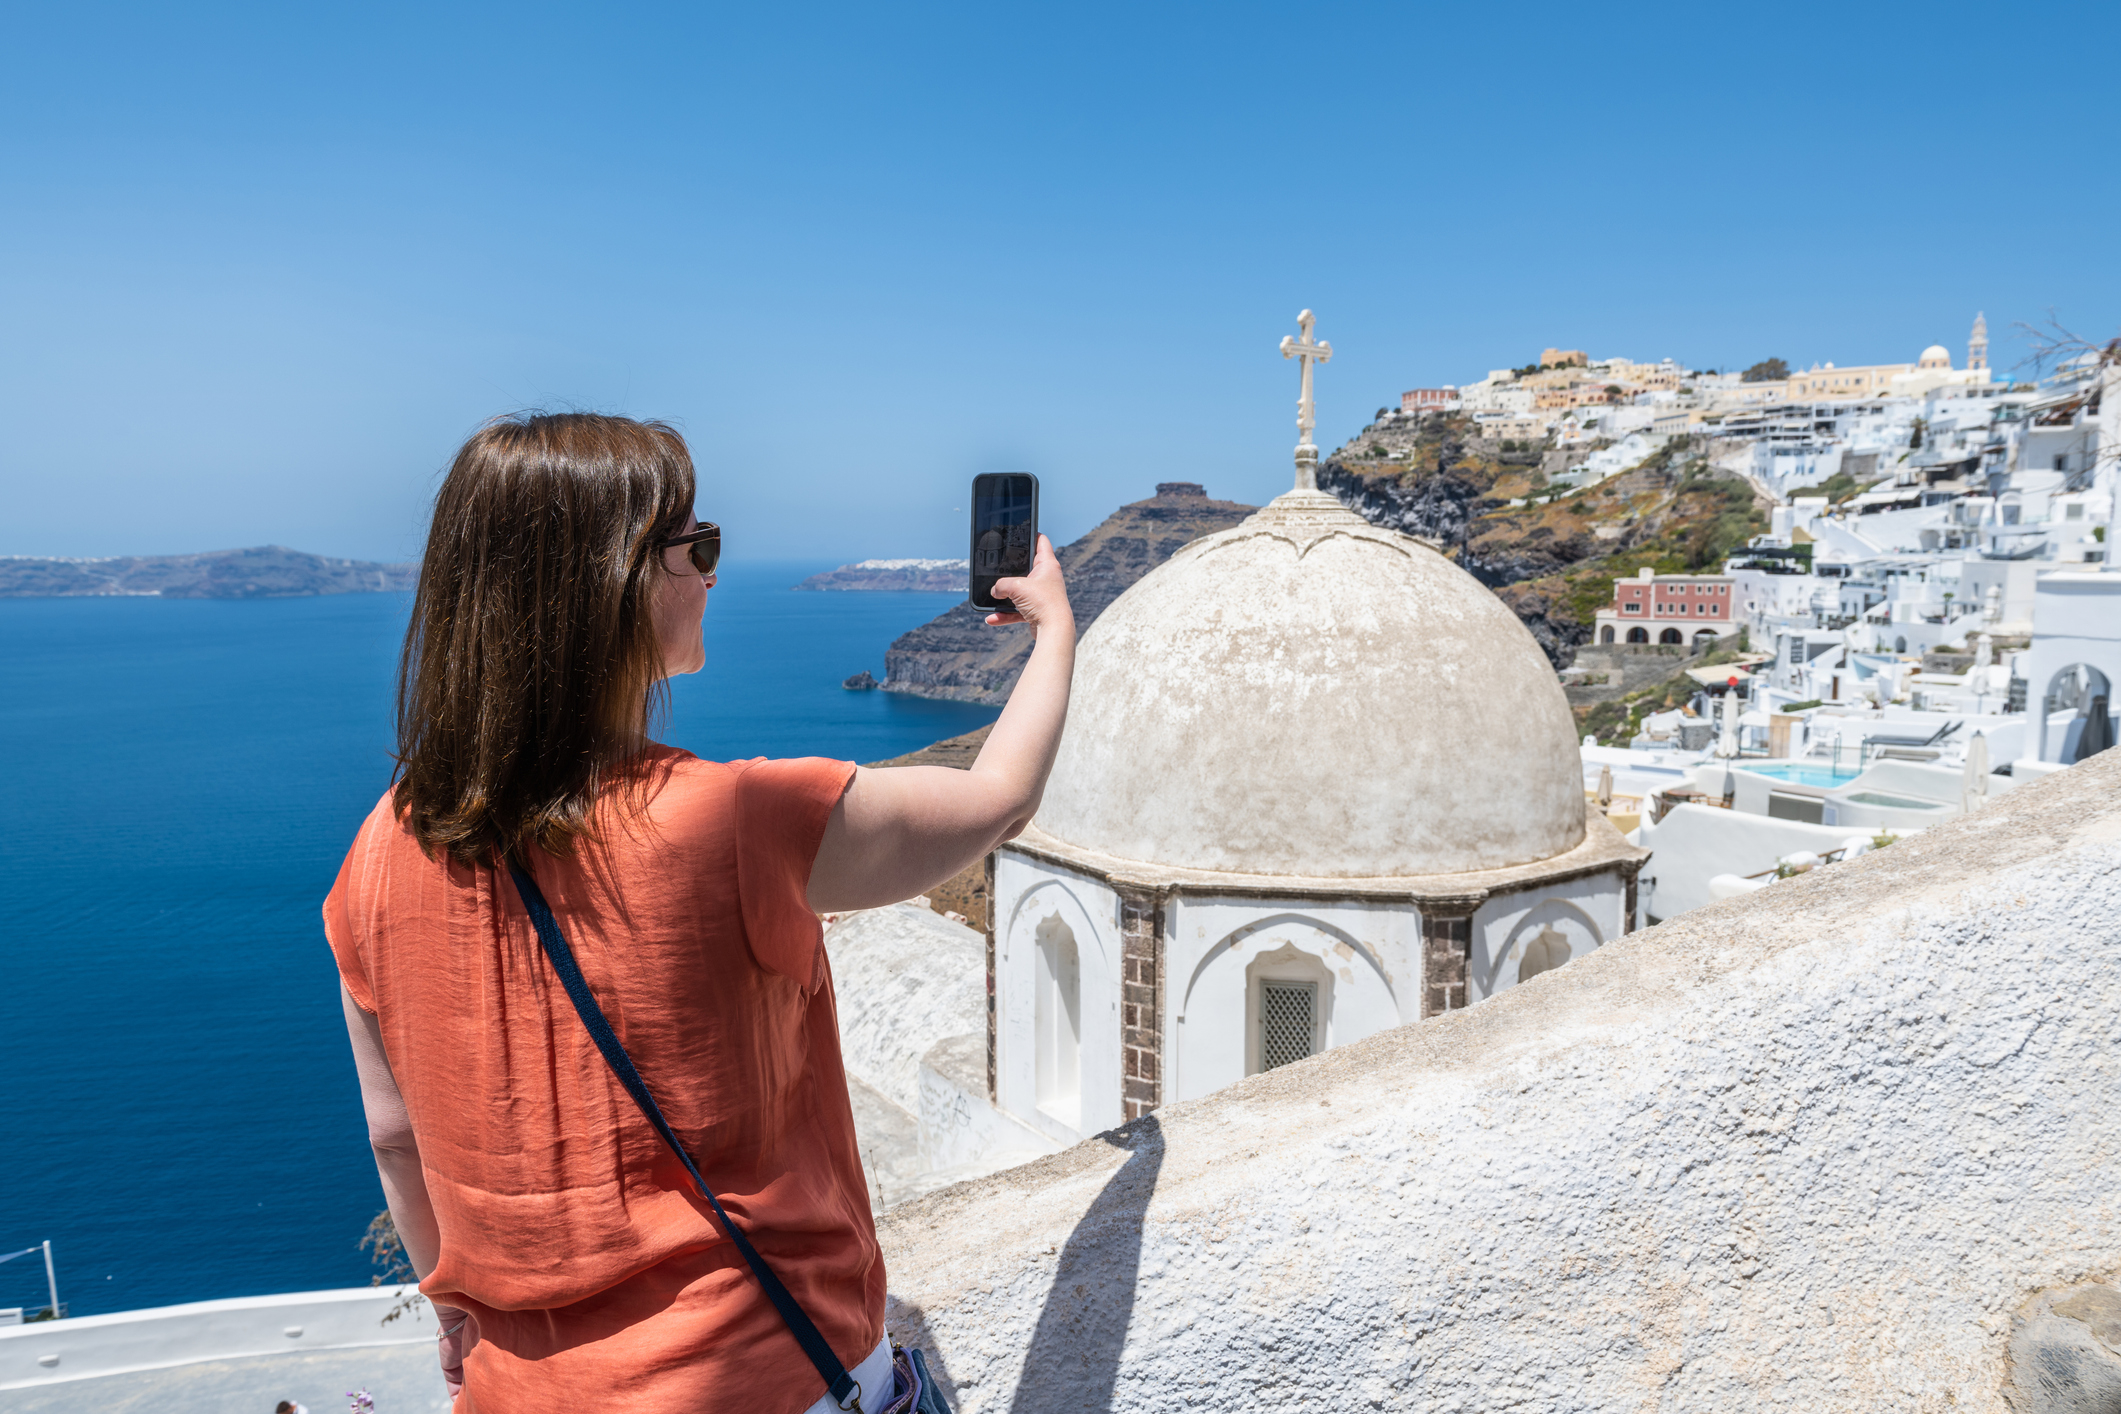 A person taking a selfie with a smartphone against the backdrop of a coastal town with distinctive architecture